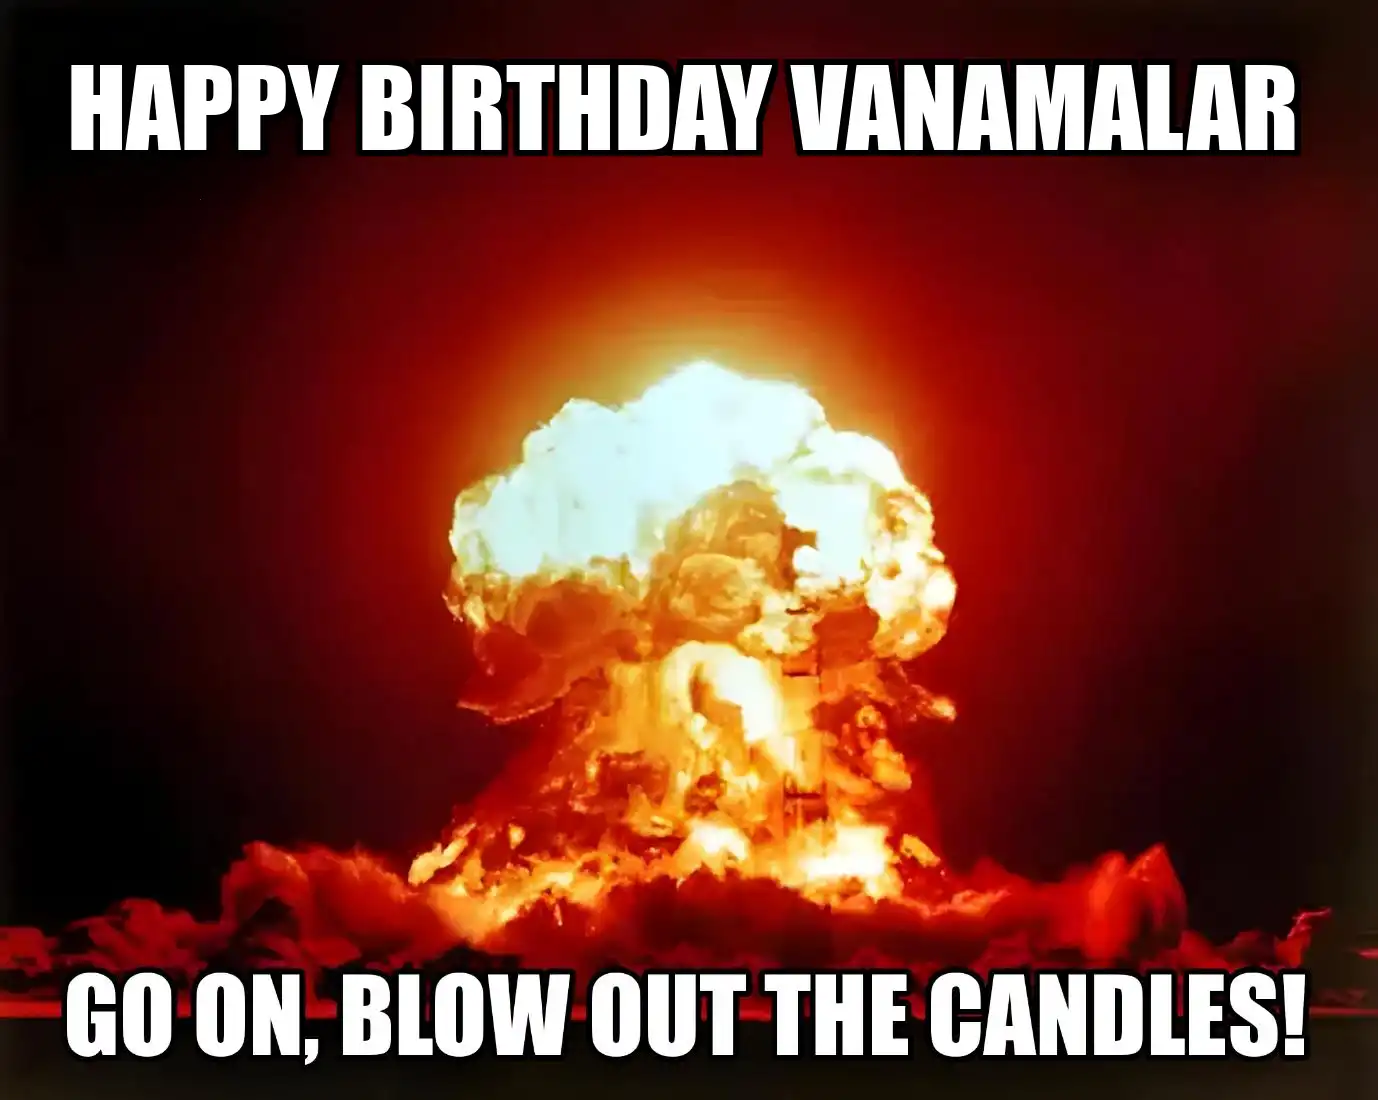 Happy Birthday Vanamalar Go On Blow Out The Candles Meme